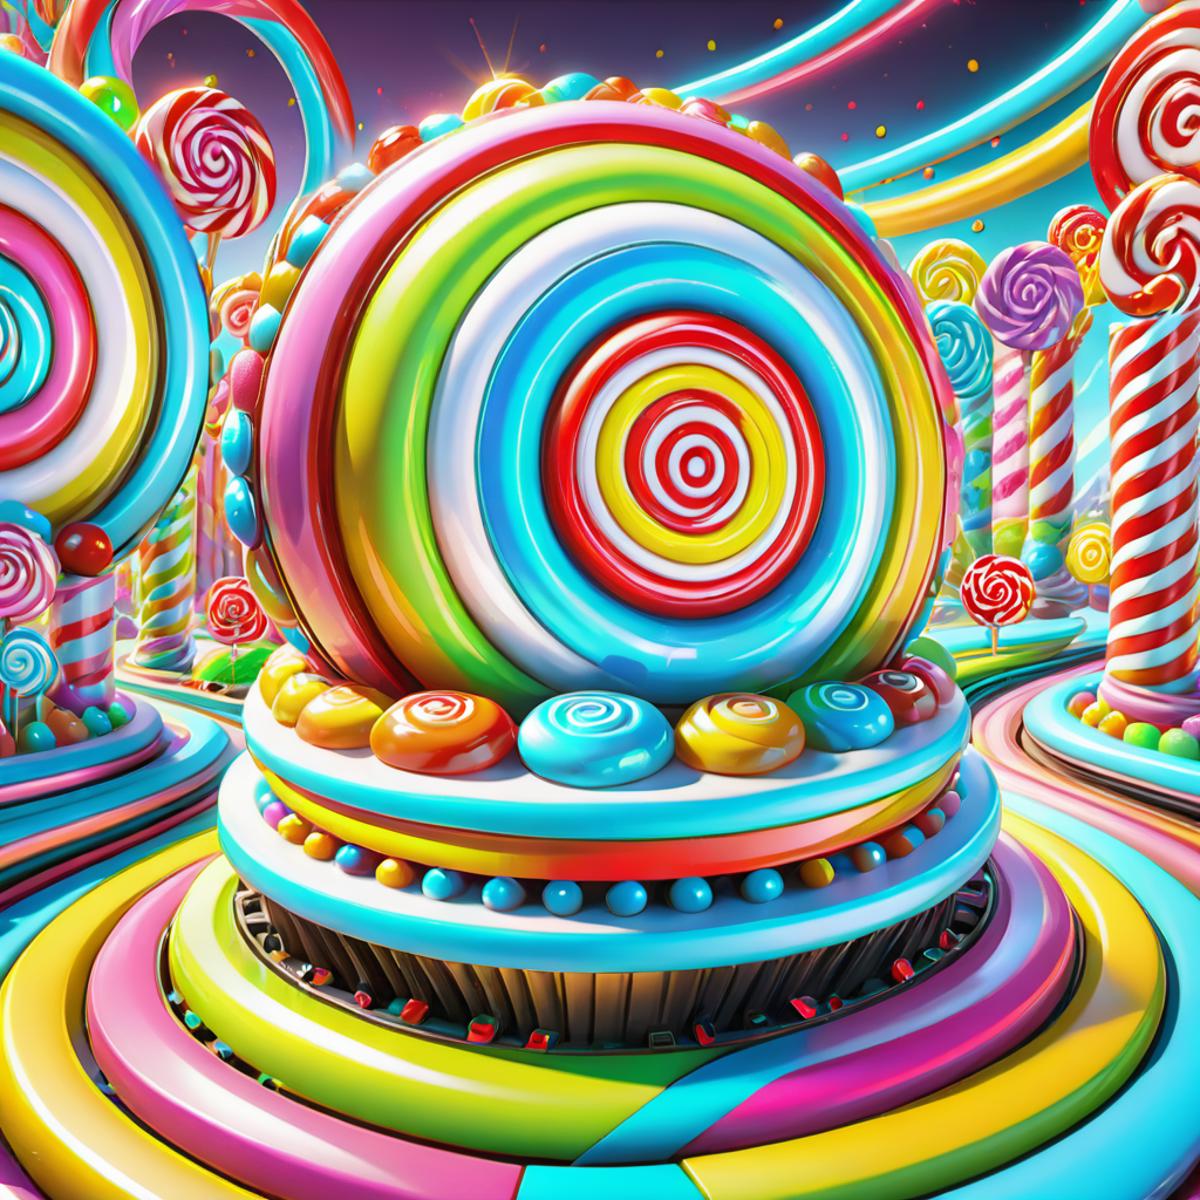 Candy Land image by DonMischo